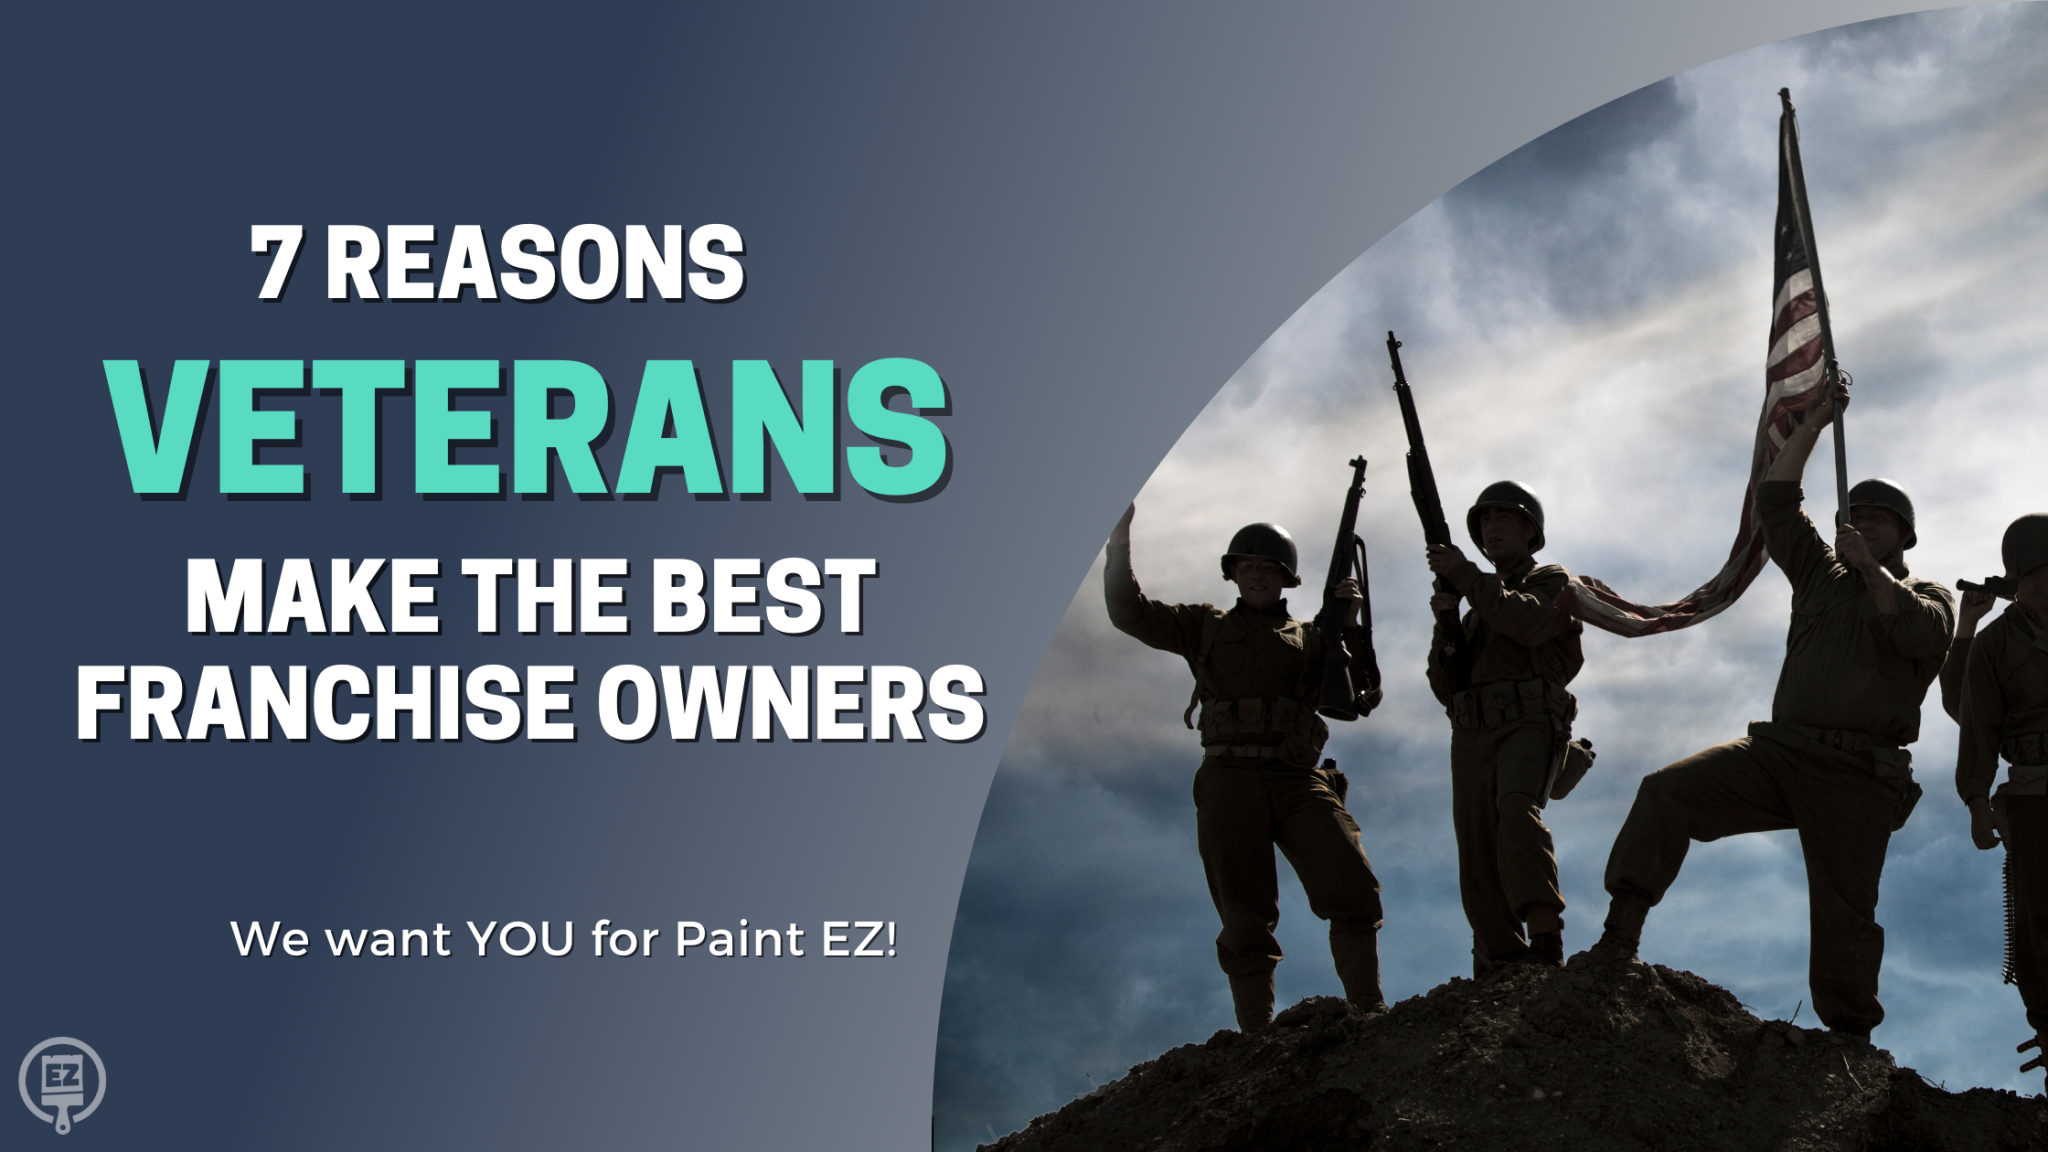 7 Reasons Veterans Make the Best Franchise Owners